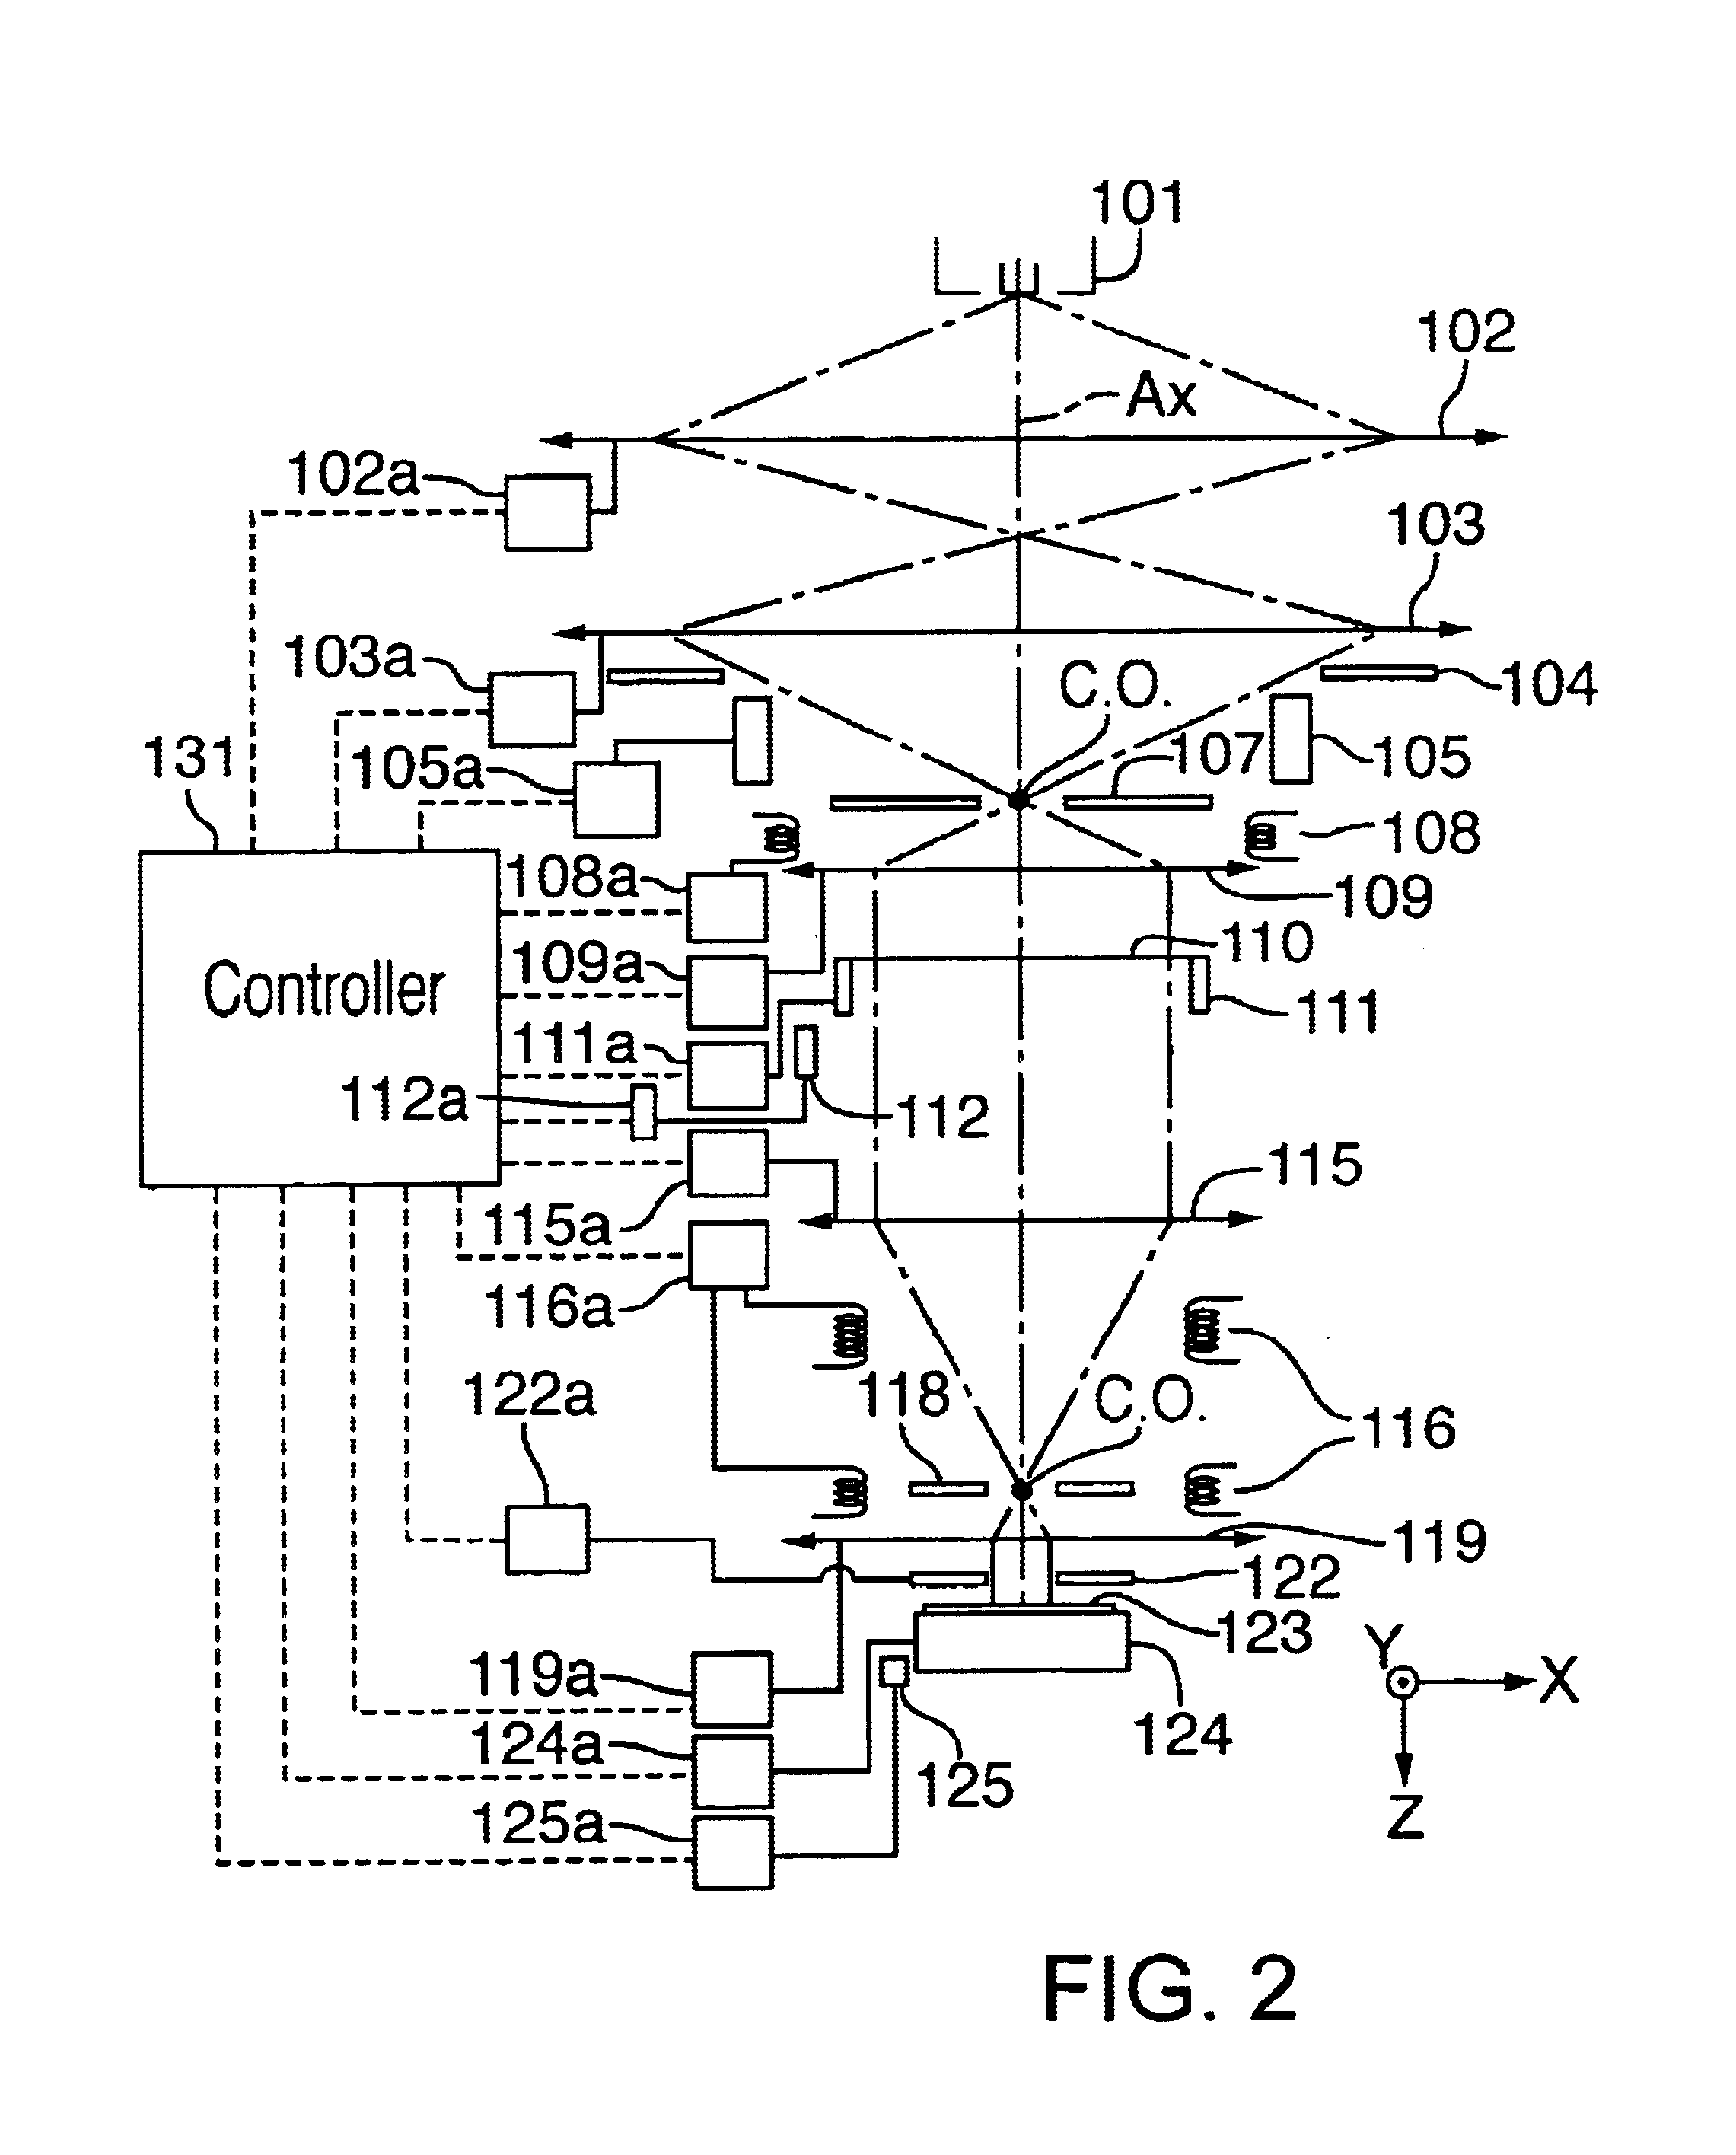 Methods and apparatus for detecting and correcting reticle deformations in microlithography